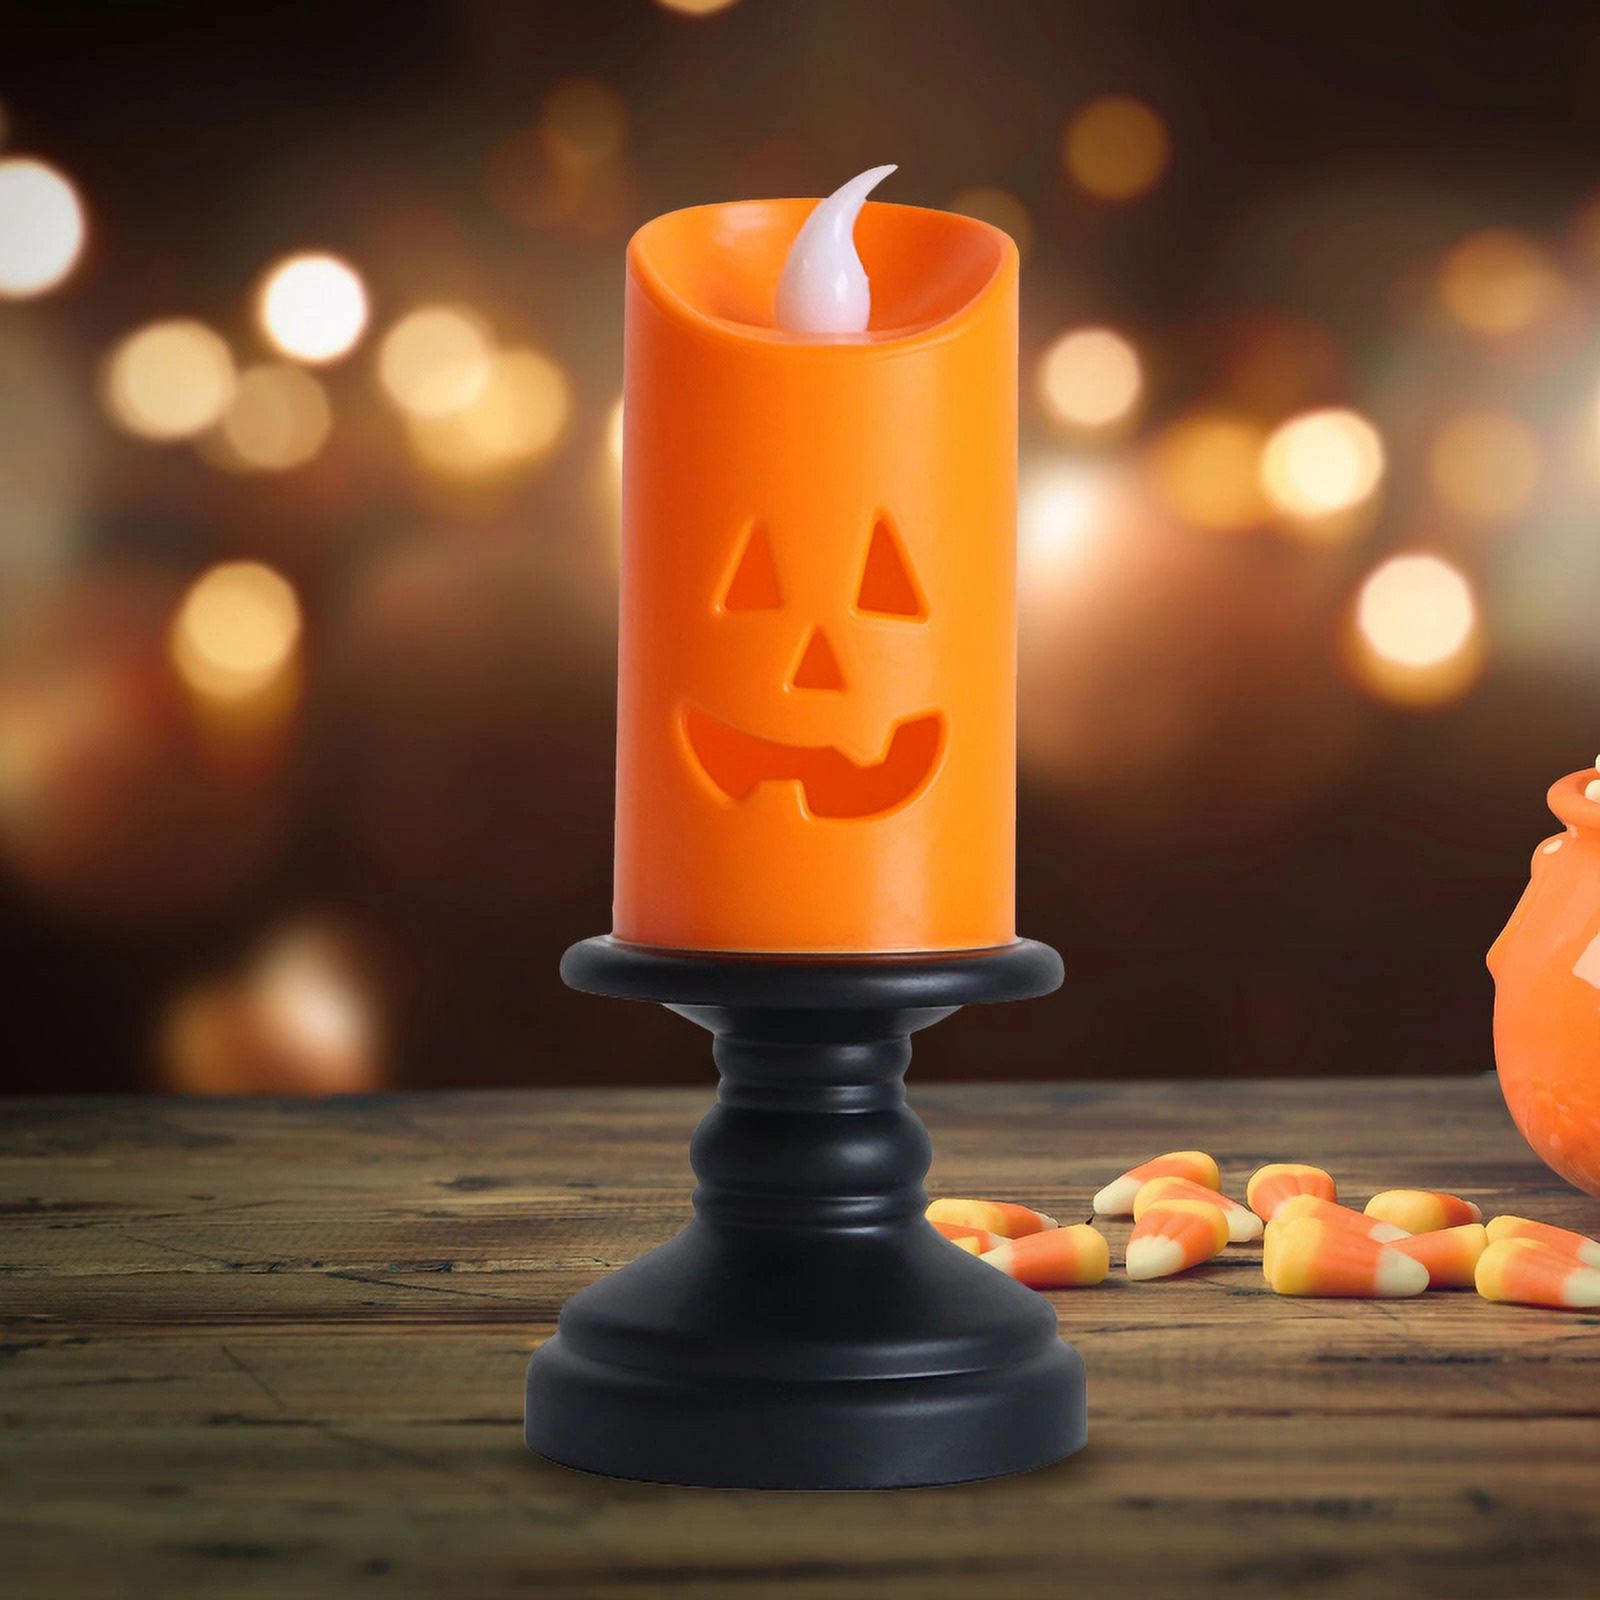 6 PACK Halloween Pumpkin Candle Light, Halloween Orange Flameless Candle Lights LED Lamps Festival Decor Light for Halloween Party - image 5 of 13